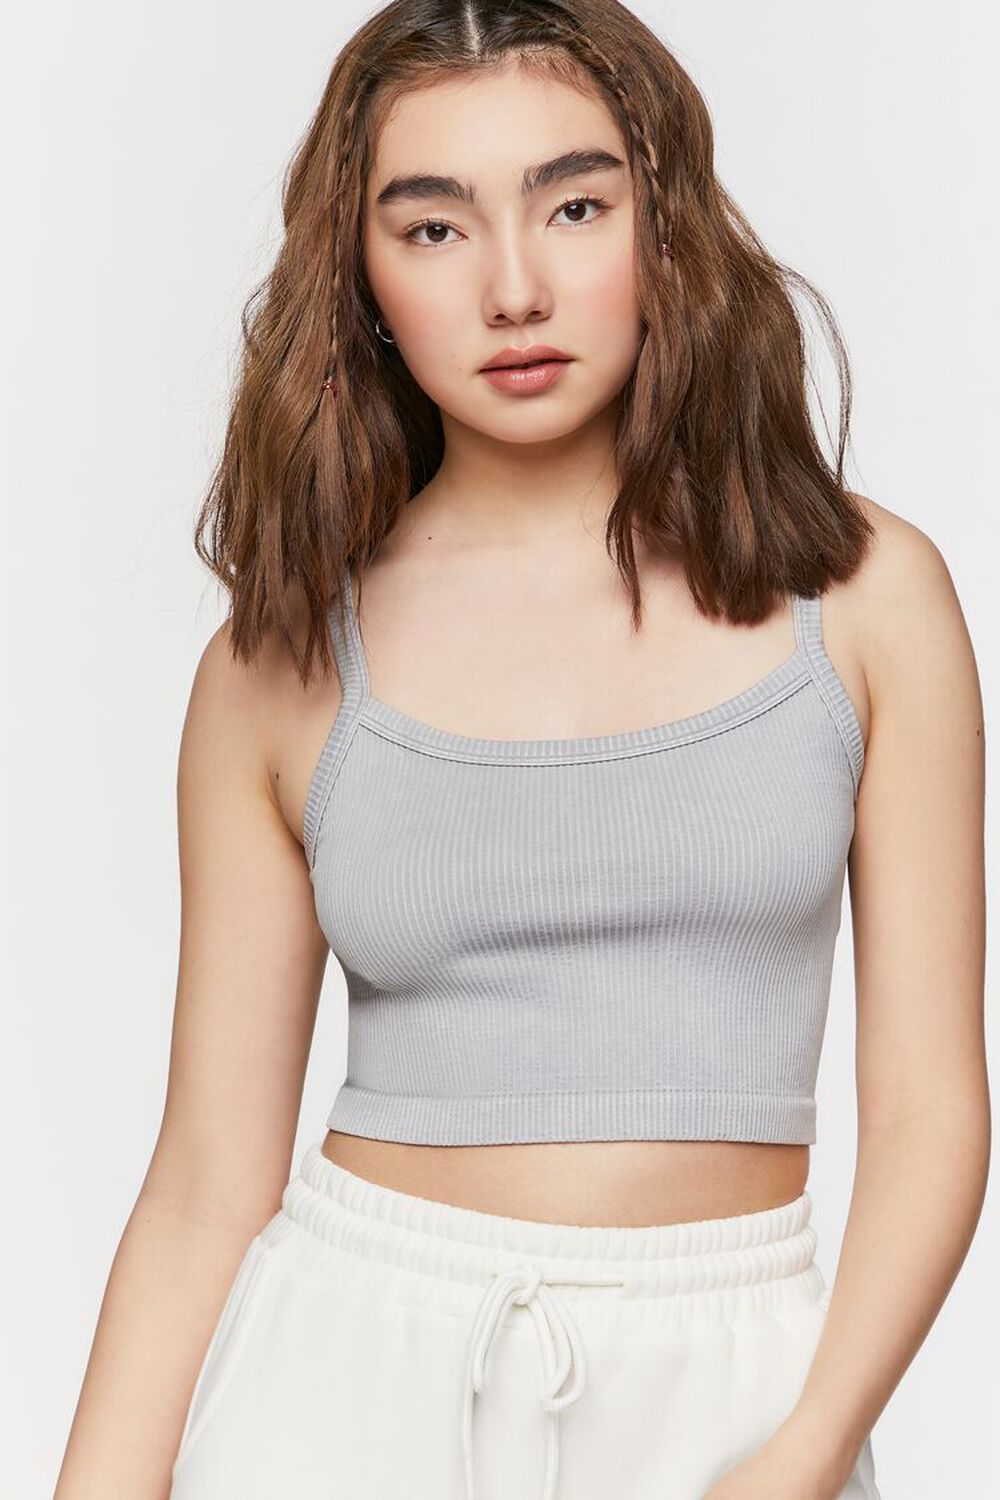 GREY VIOLET Seamless Mineral Wash Cropped Cami, image 1